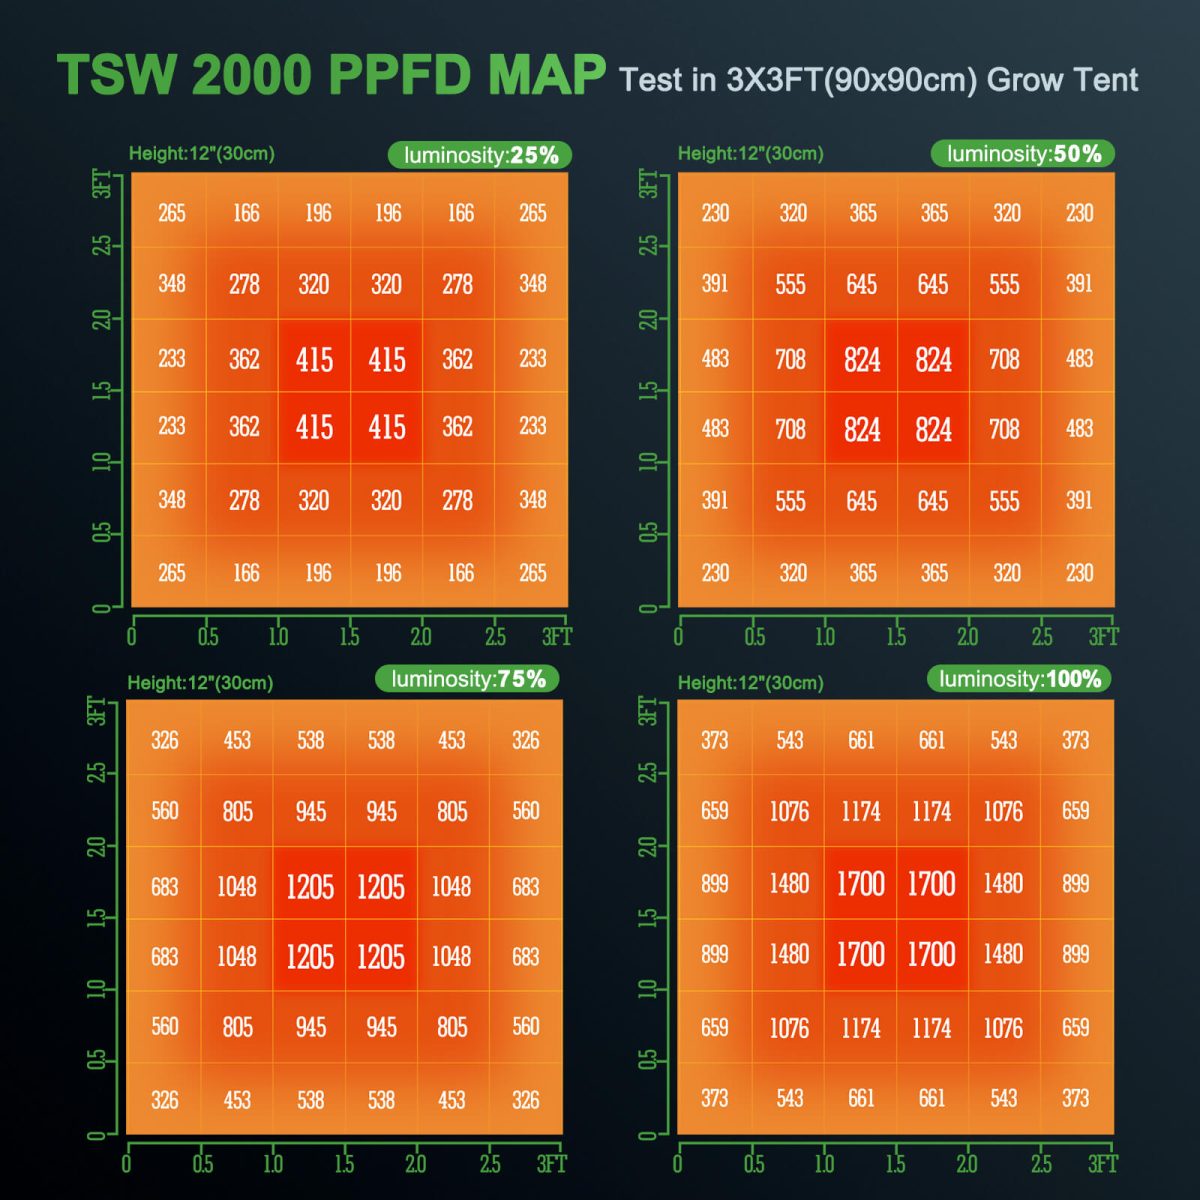 TSW 2000 LED grow ligh PPFD map in 3x3 grow tent, test at 25%, 50%, 75% and 100% luminosity, high PPFD